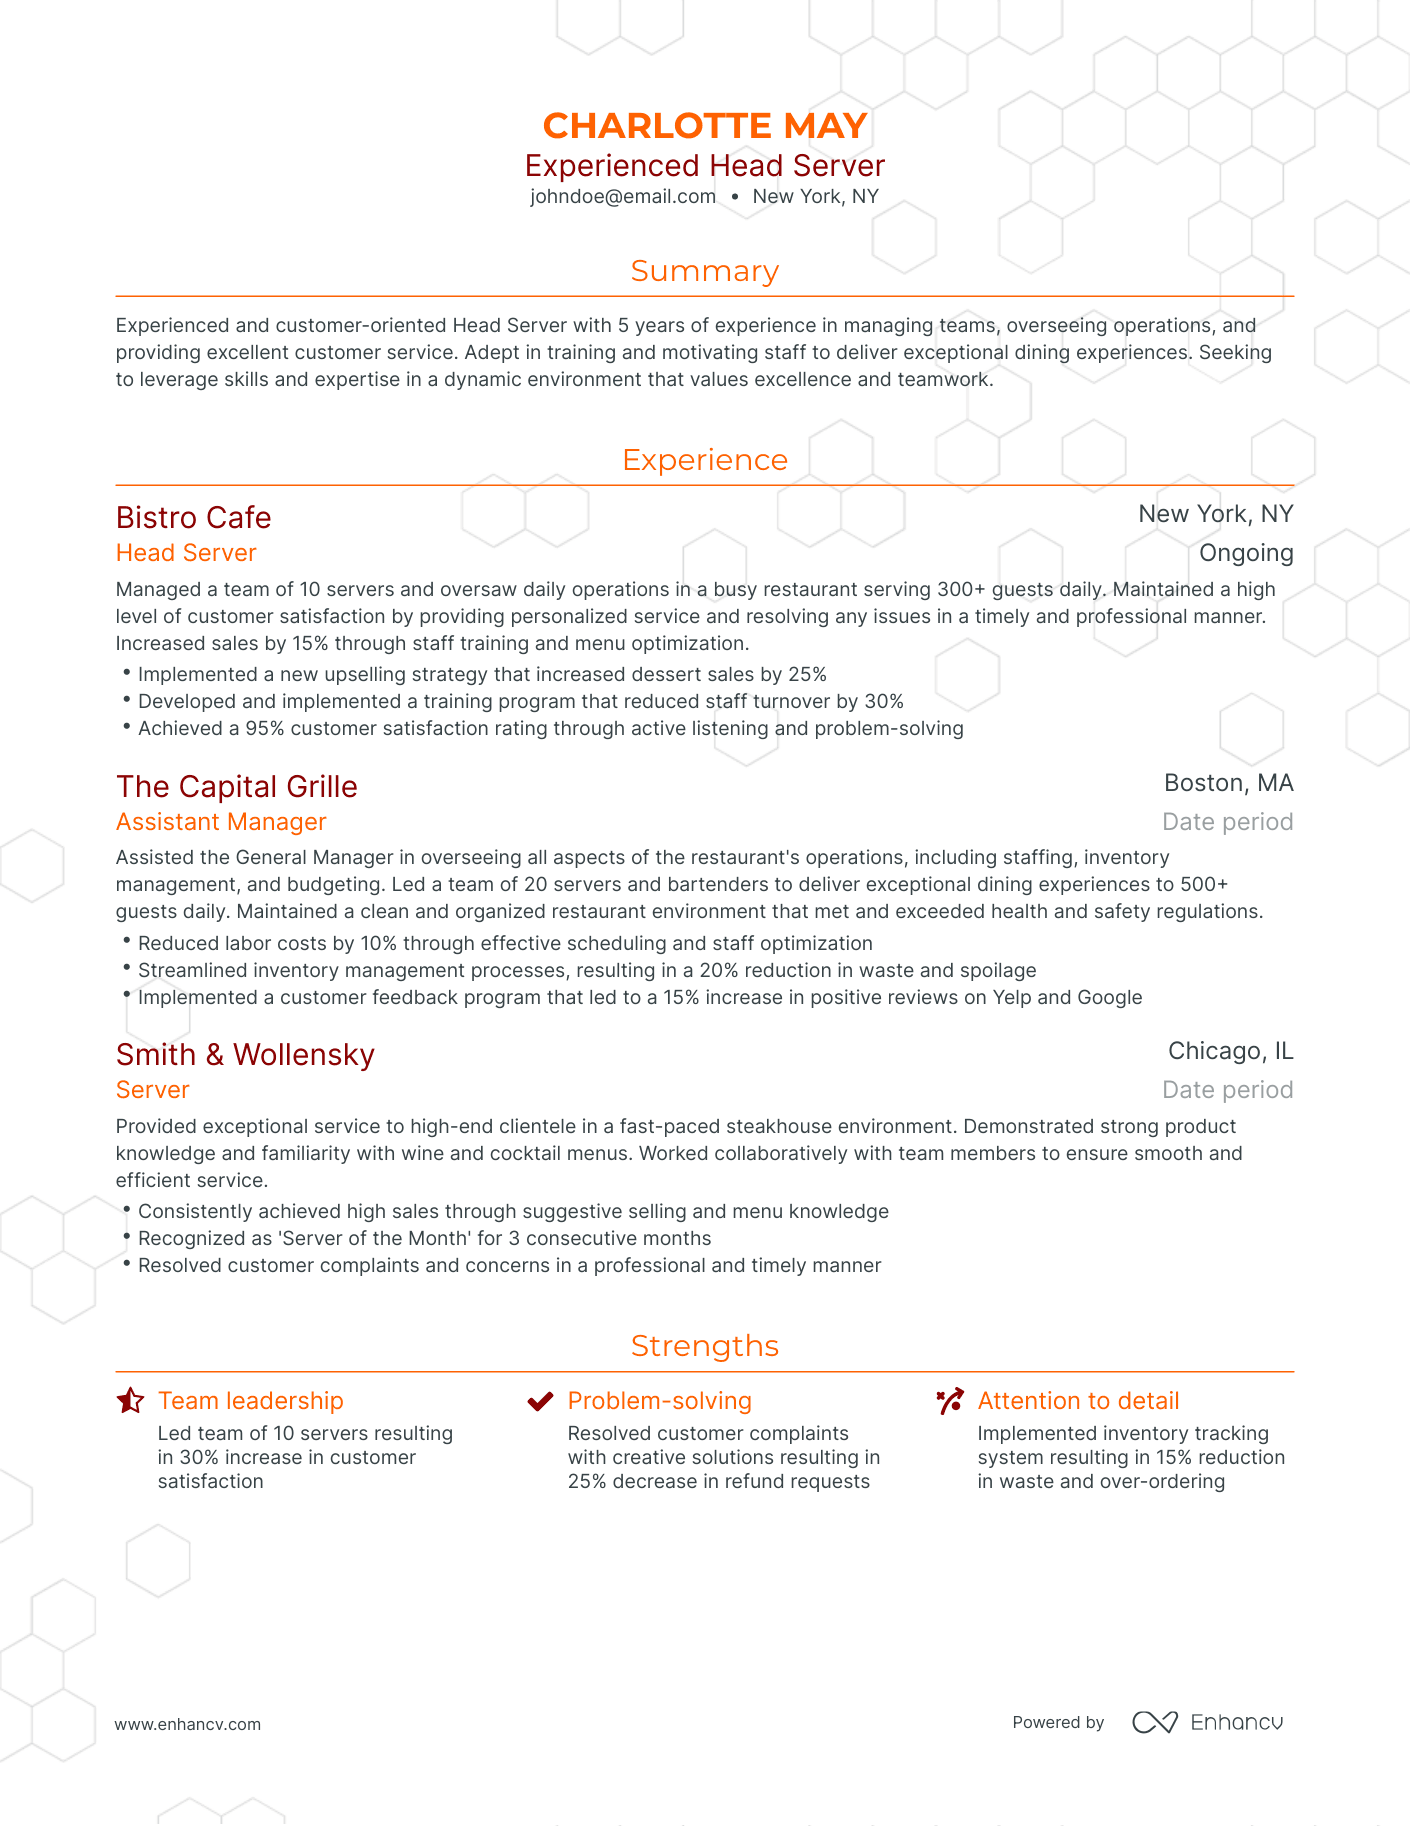 Traditional Head Server Resume Template